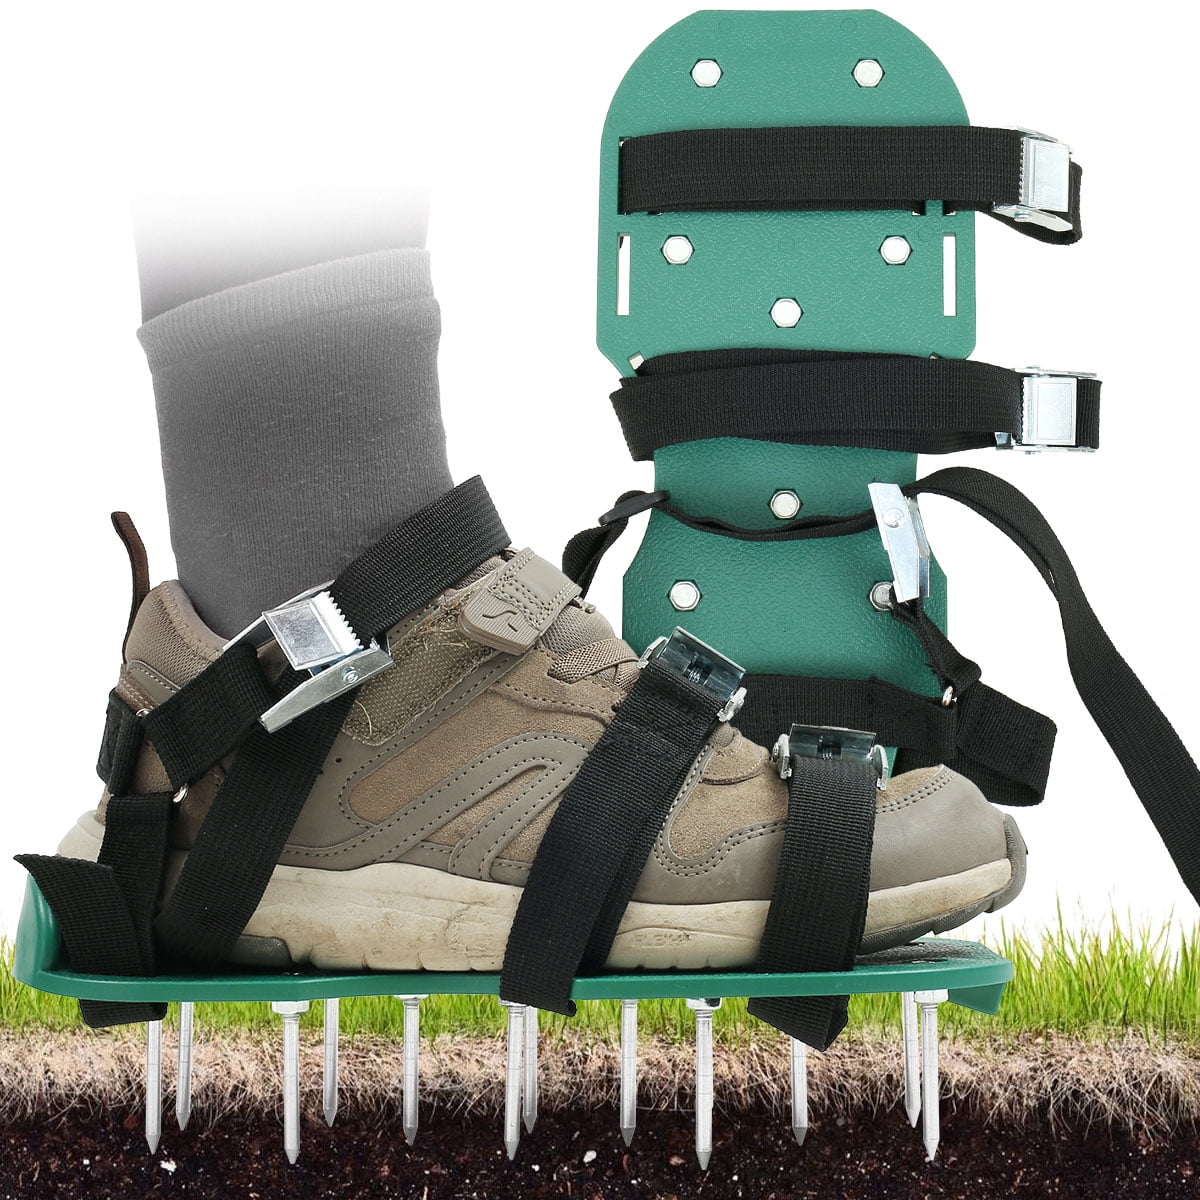 1Pair Garden Lawn Aerator Aerating Sandals/Shoes Seed with 26 Spikes 13 x 4.5cm 